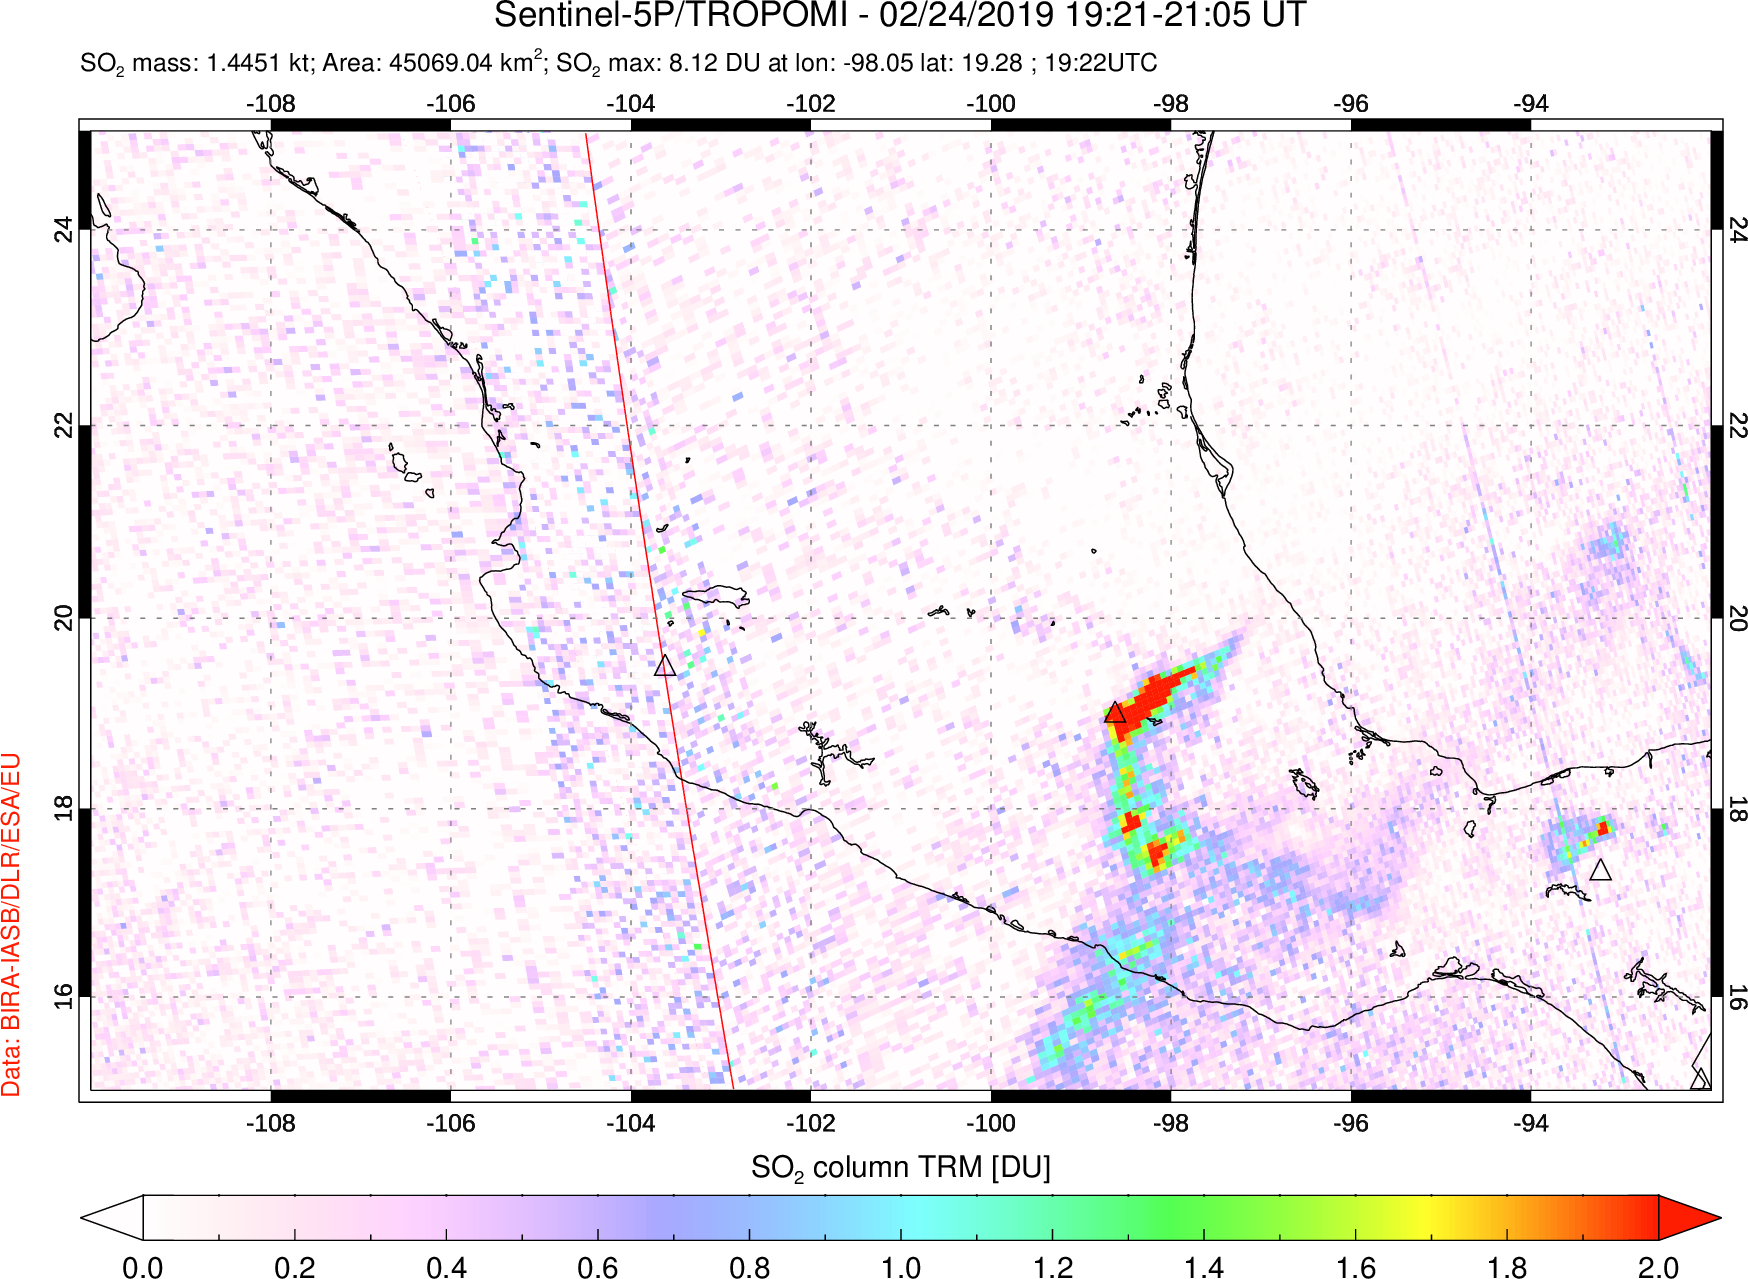 A sulfur dioxide image over Mexico on Feb 24, 2019.